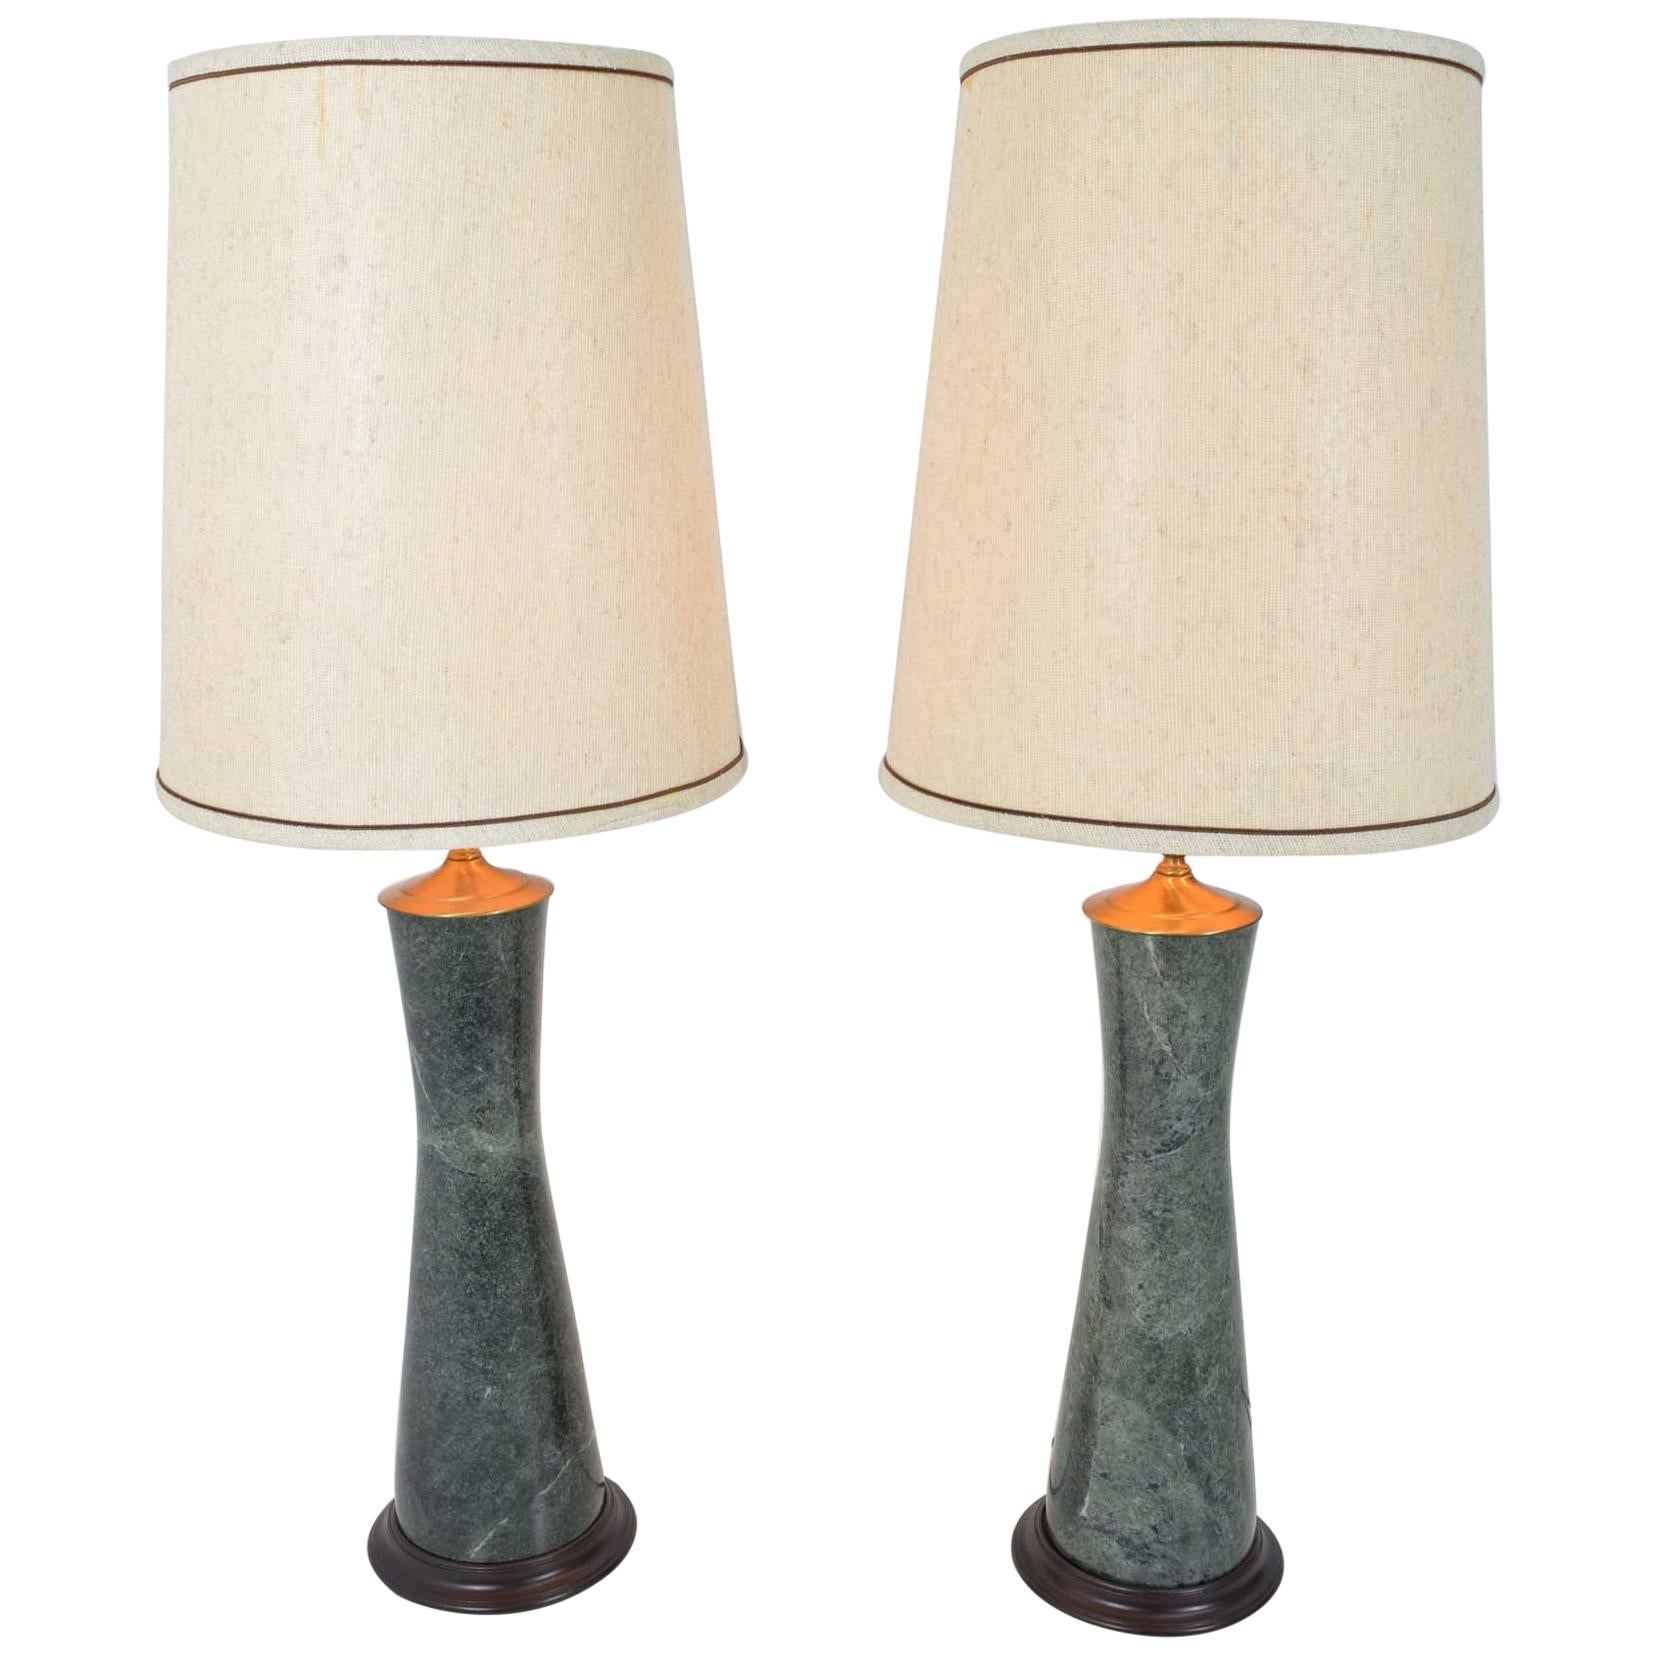 Marble Table Lamps in Teal